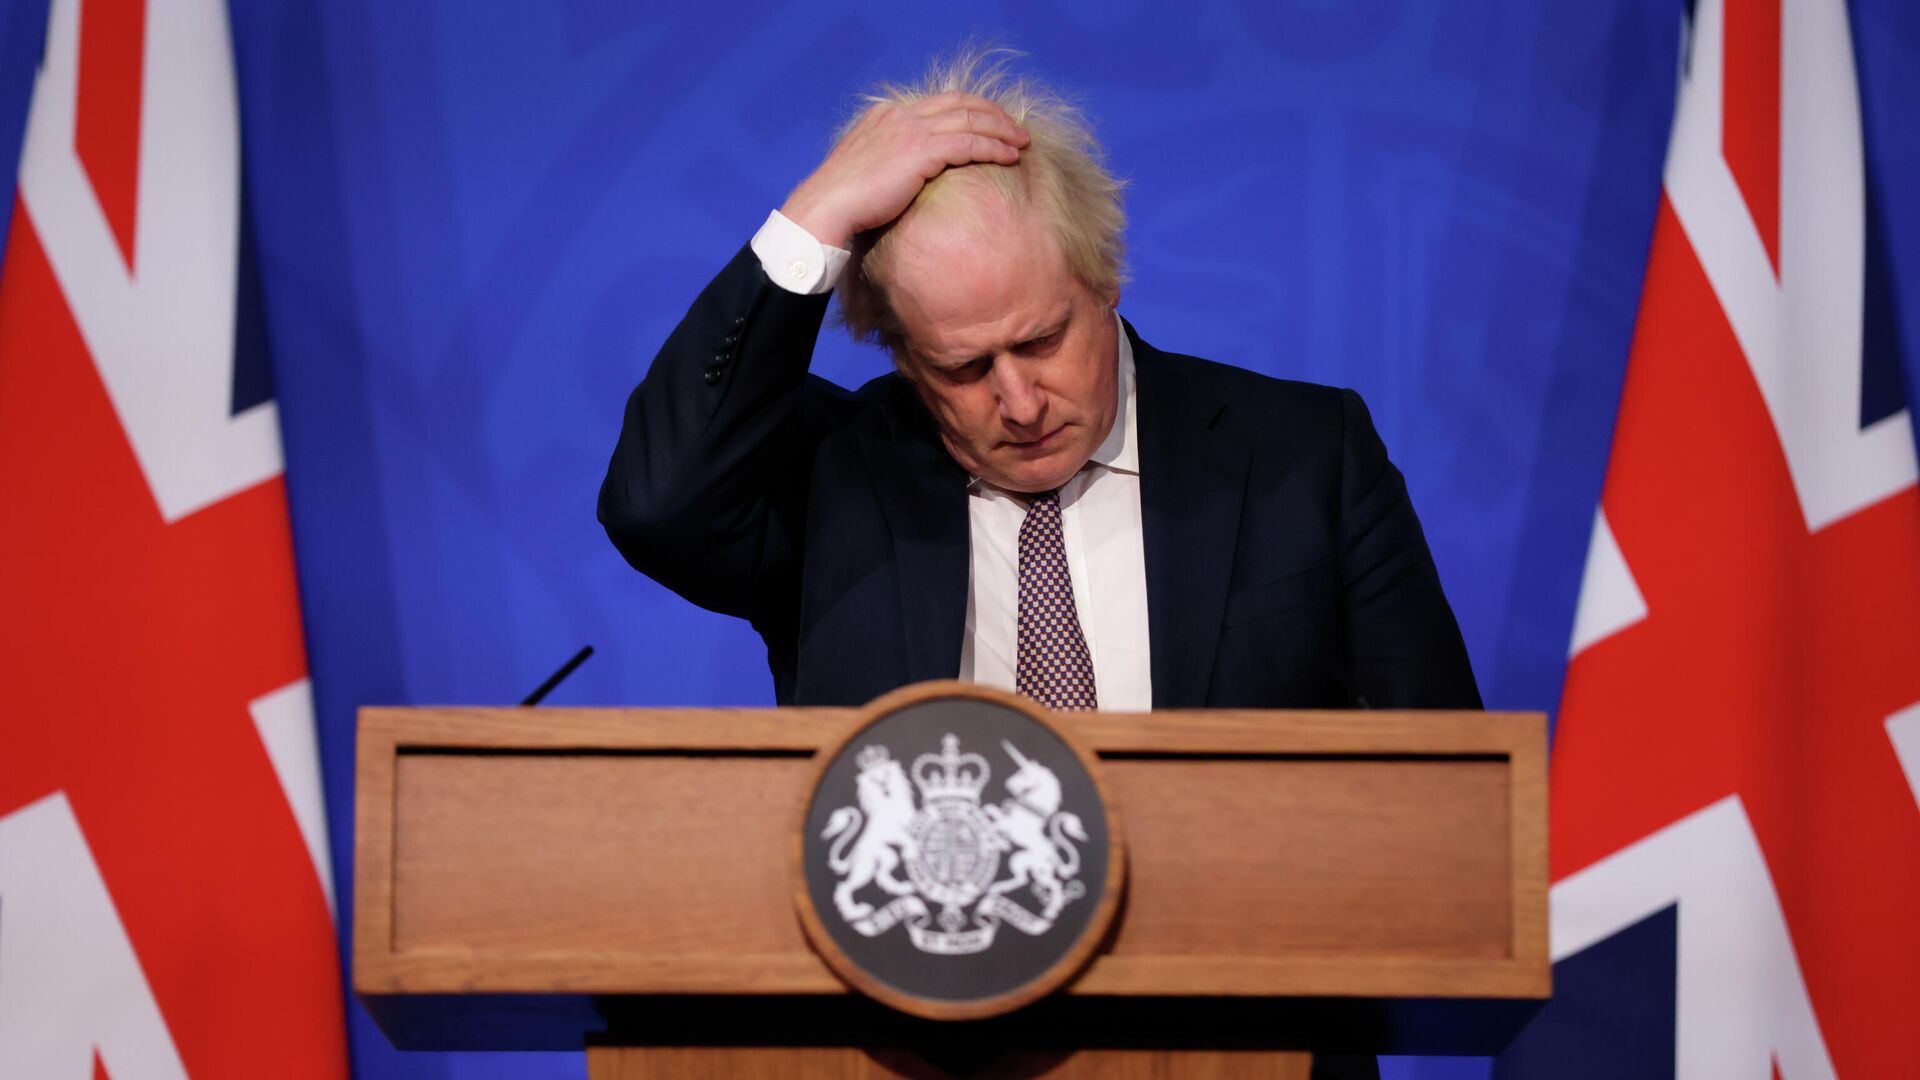 Britain's Prime Minister Boris Johnson gestures as he speaks during a press conference in London, Saturday Nov. 27, 2021, after cases of the new COVID-19 variant were confirmed in the UK - Sputnik International, 1920, 13.03.2022